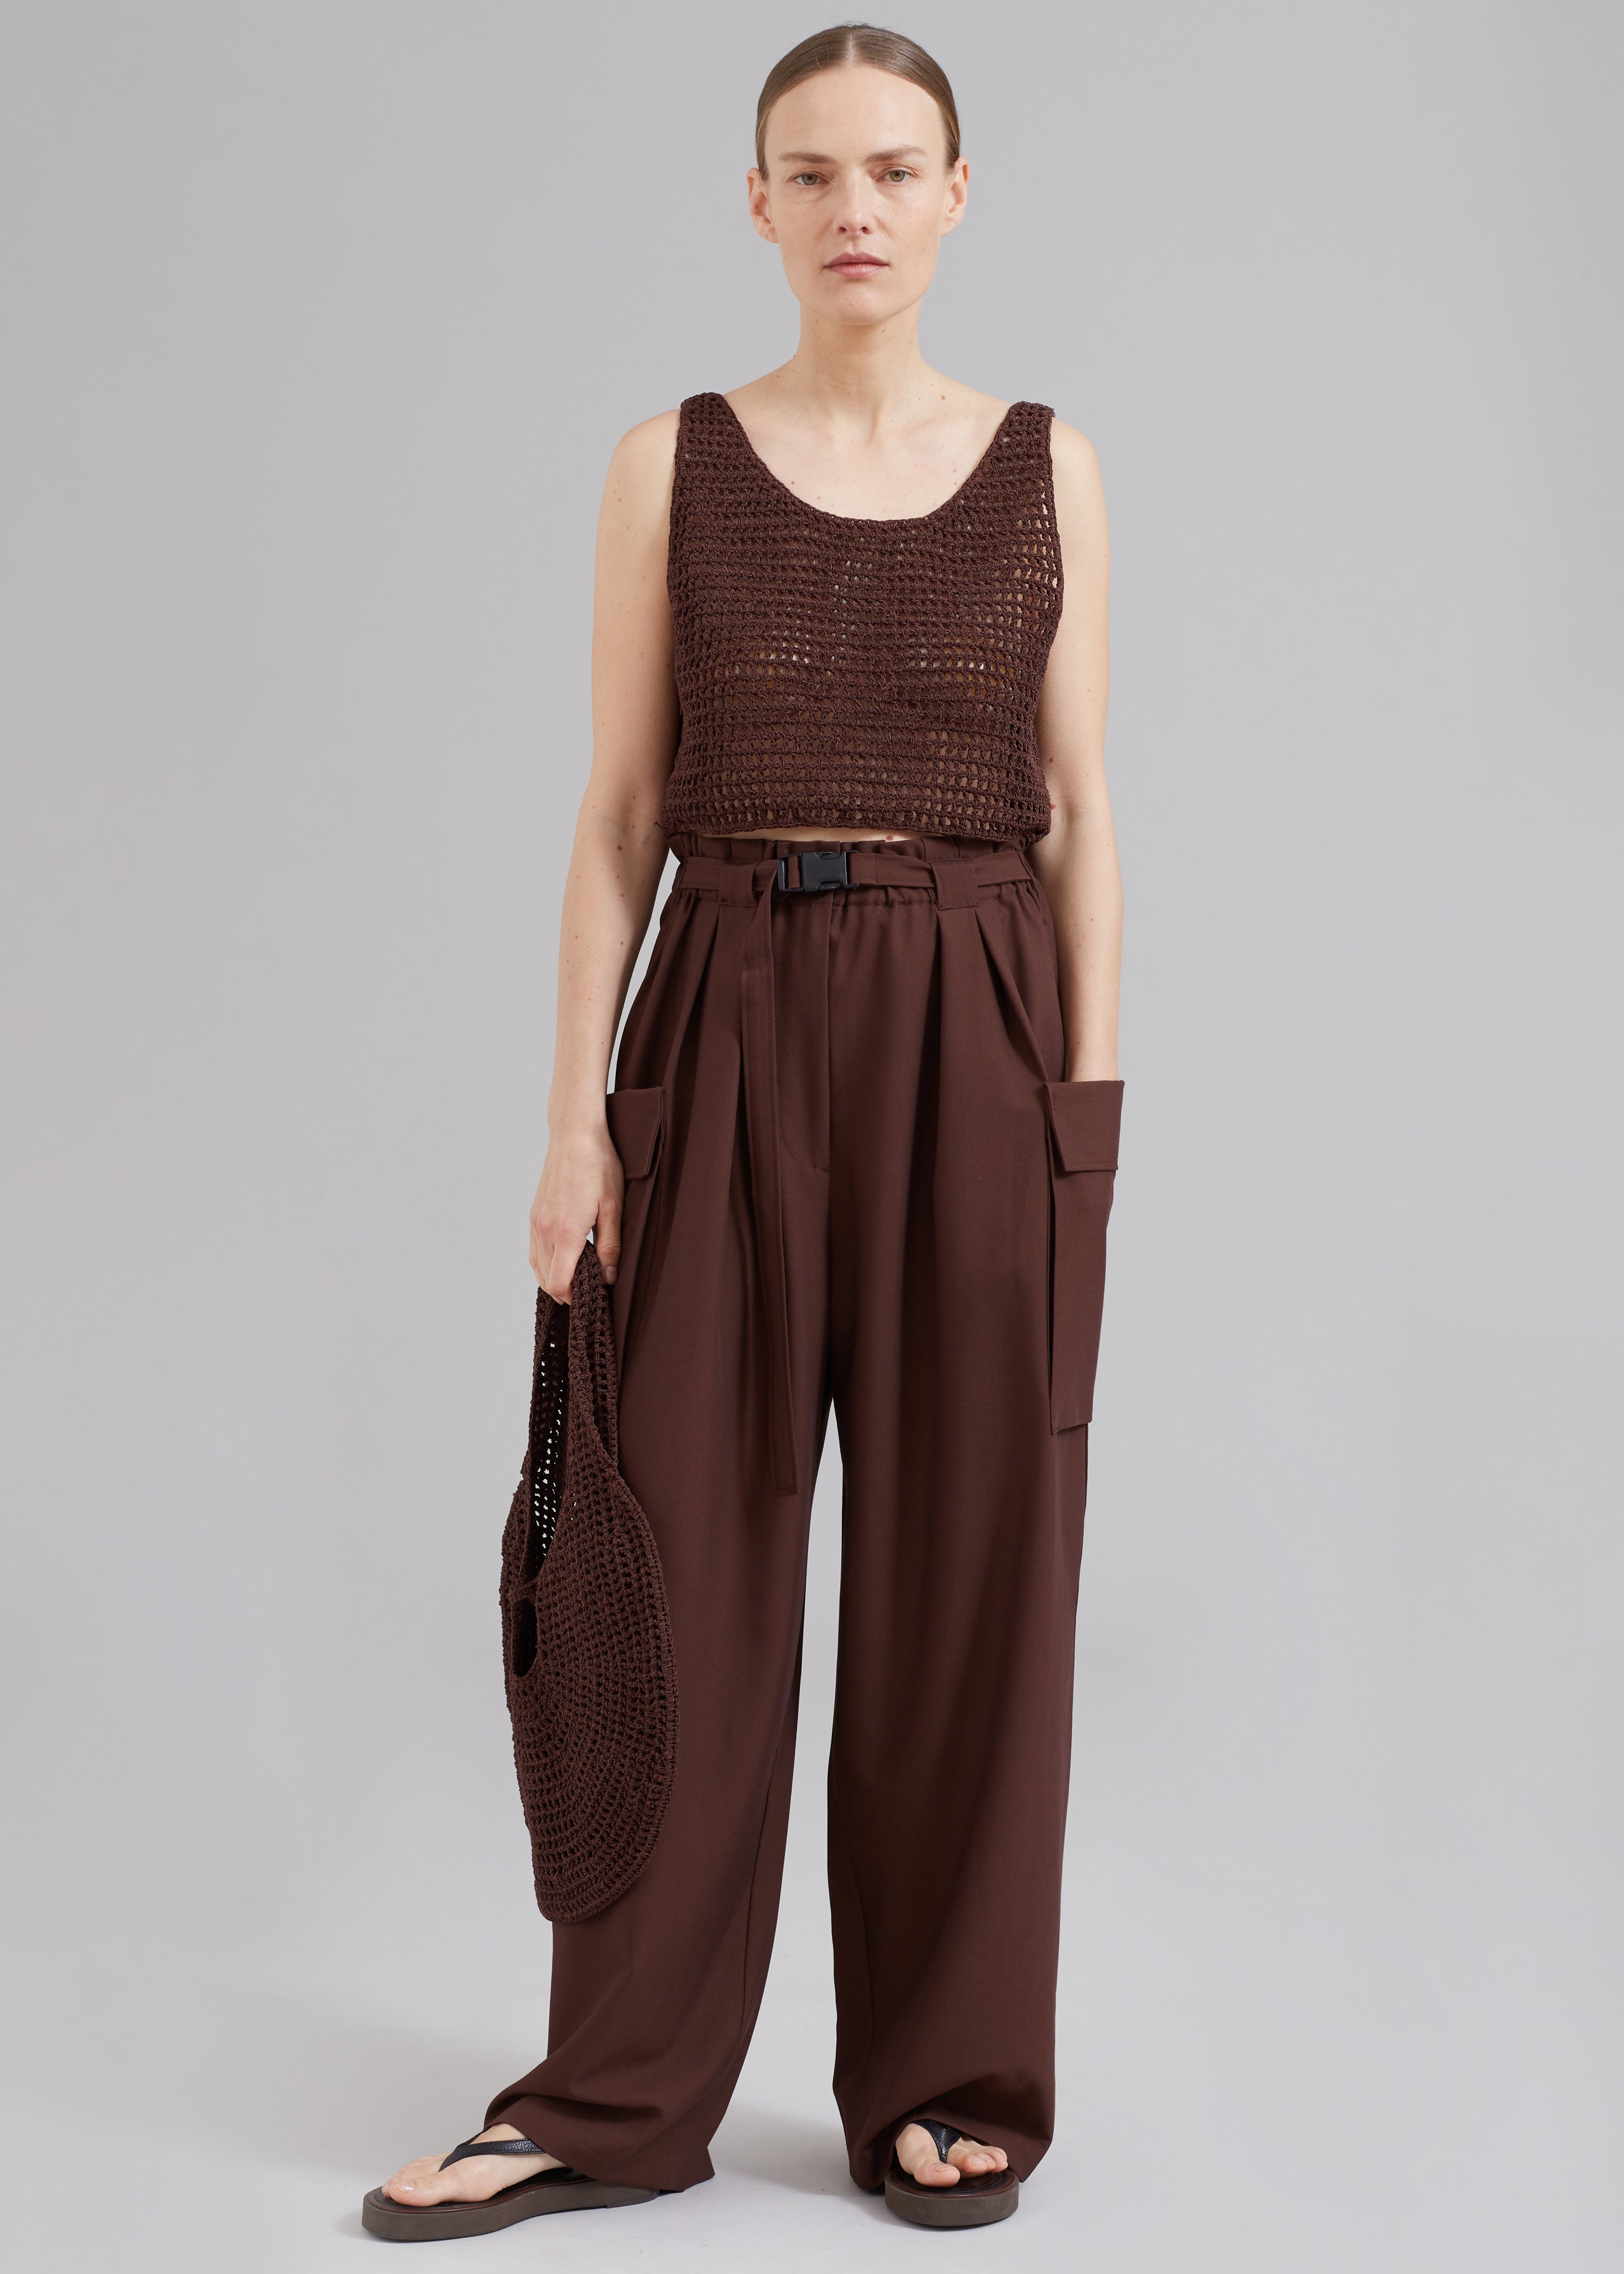 Low Classic Handmade 2-Way Knit Top - Brown - 6